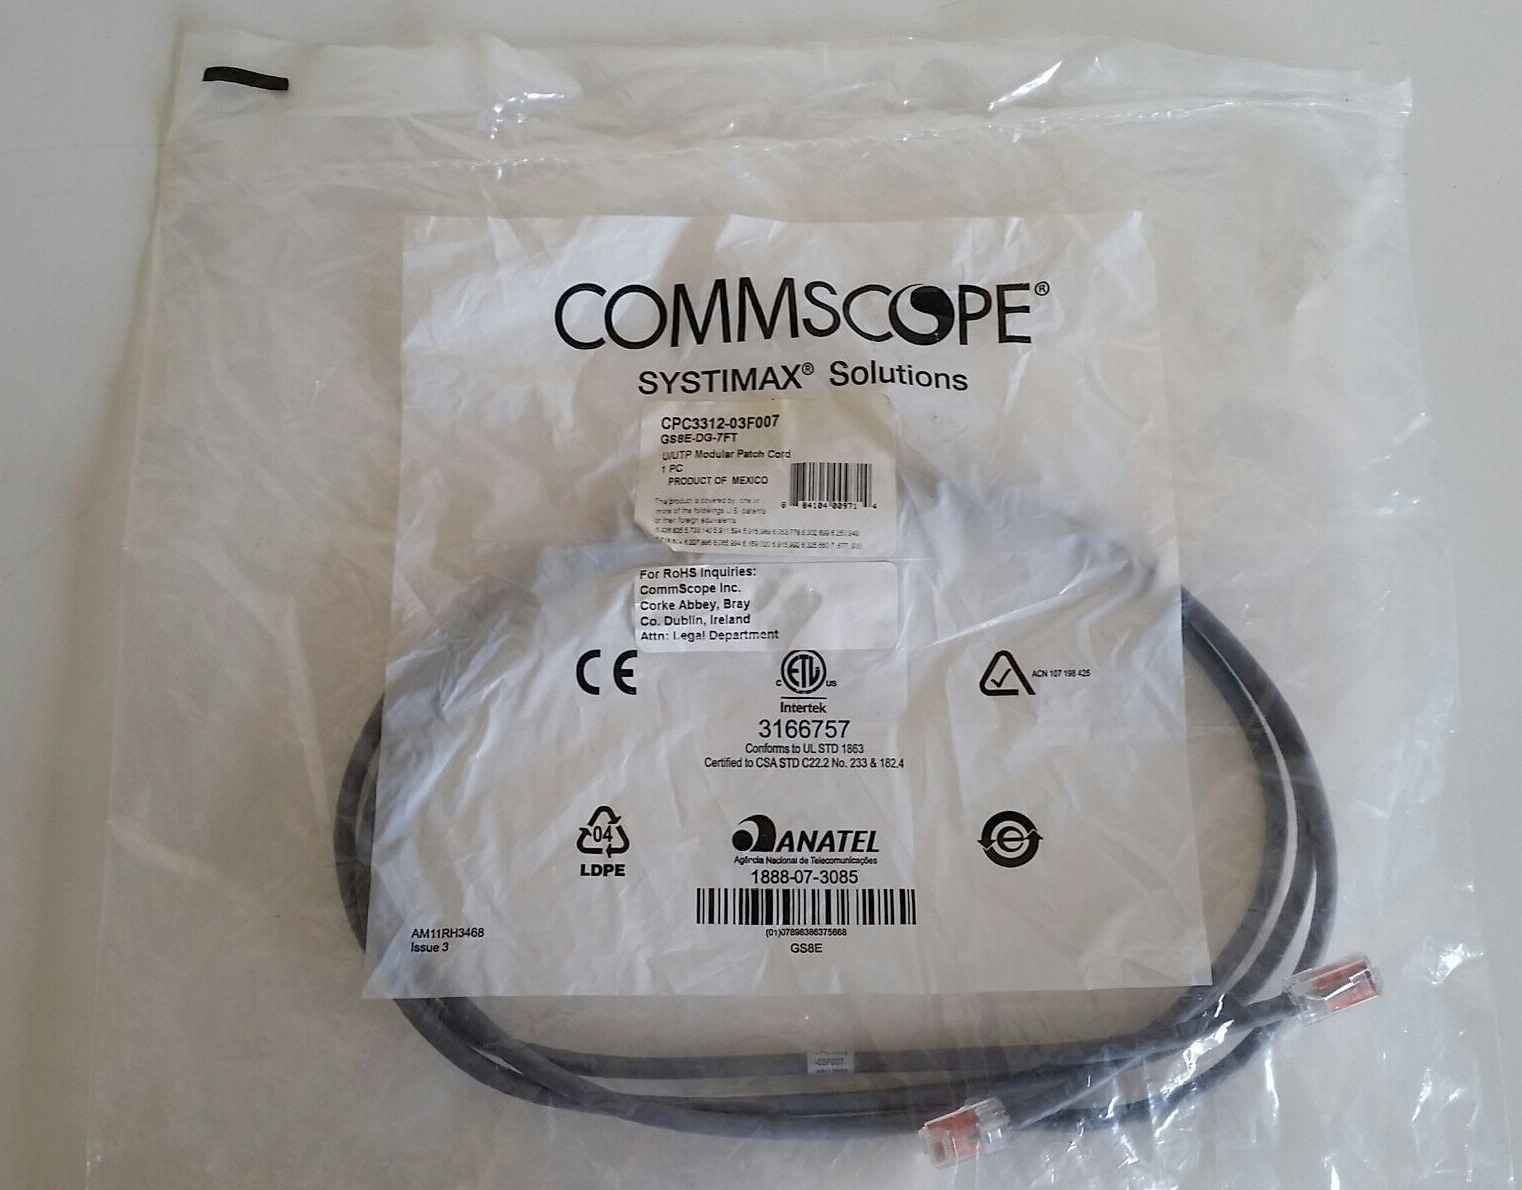 COMMSCOPE SYSTIMAX SOLUTIONS PATCH CABLE GS8E-DG-7 ft